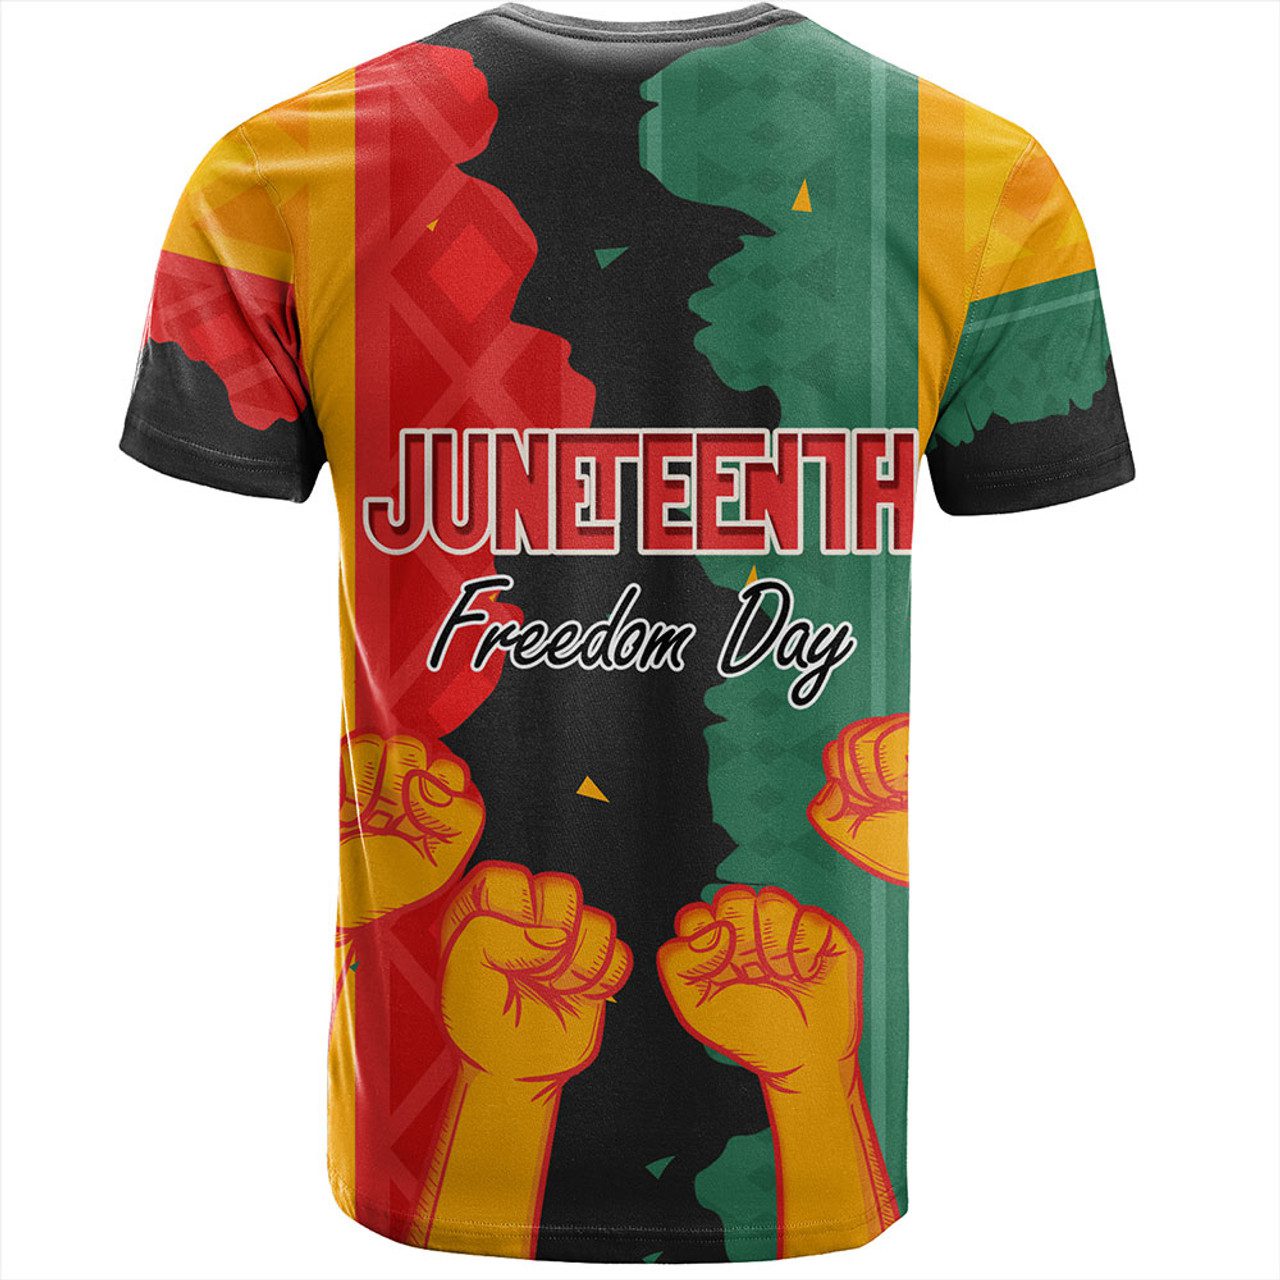 Juneteenth T-Shirt – Freedom Day Powers Hand